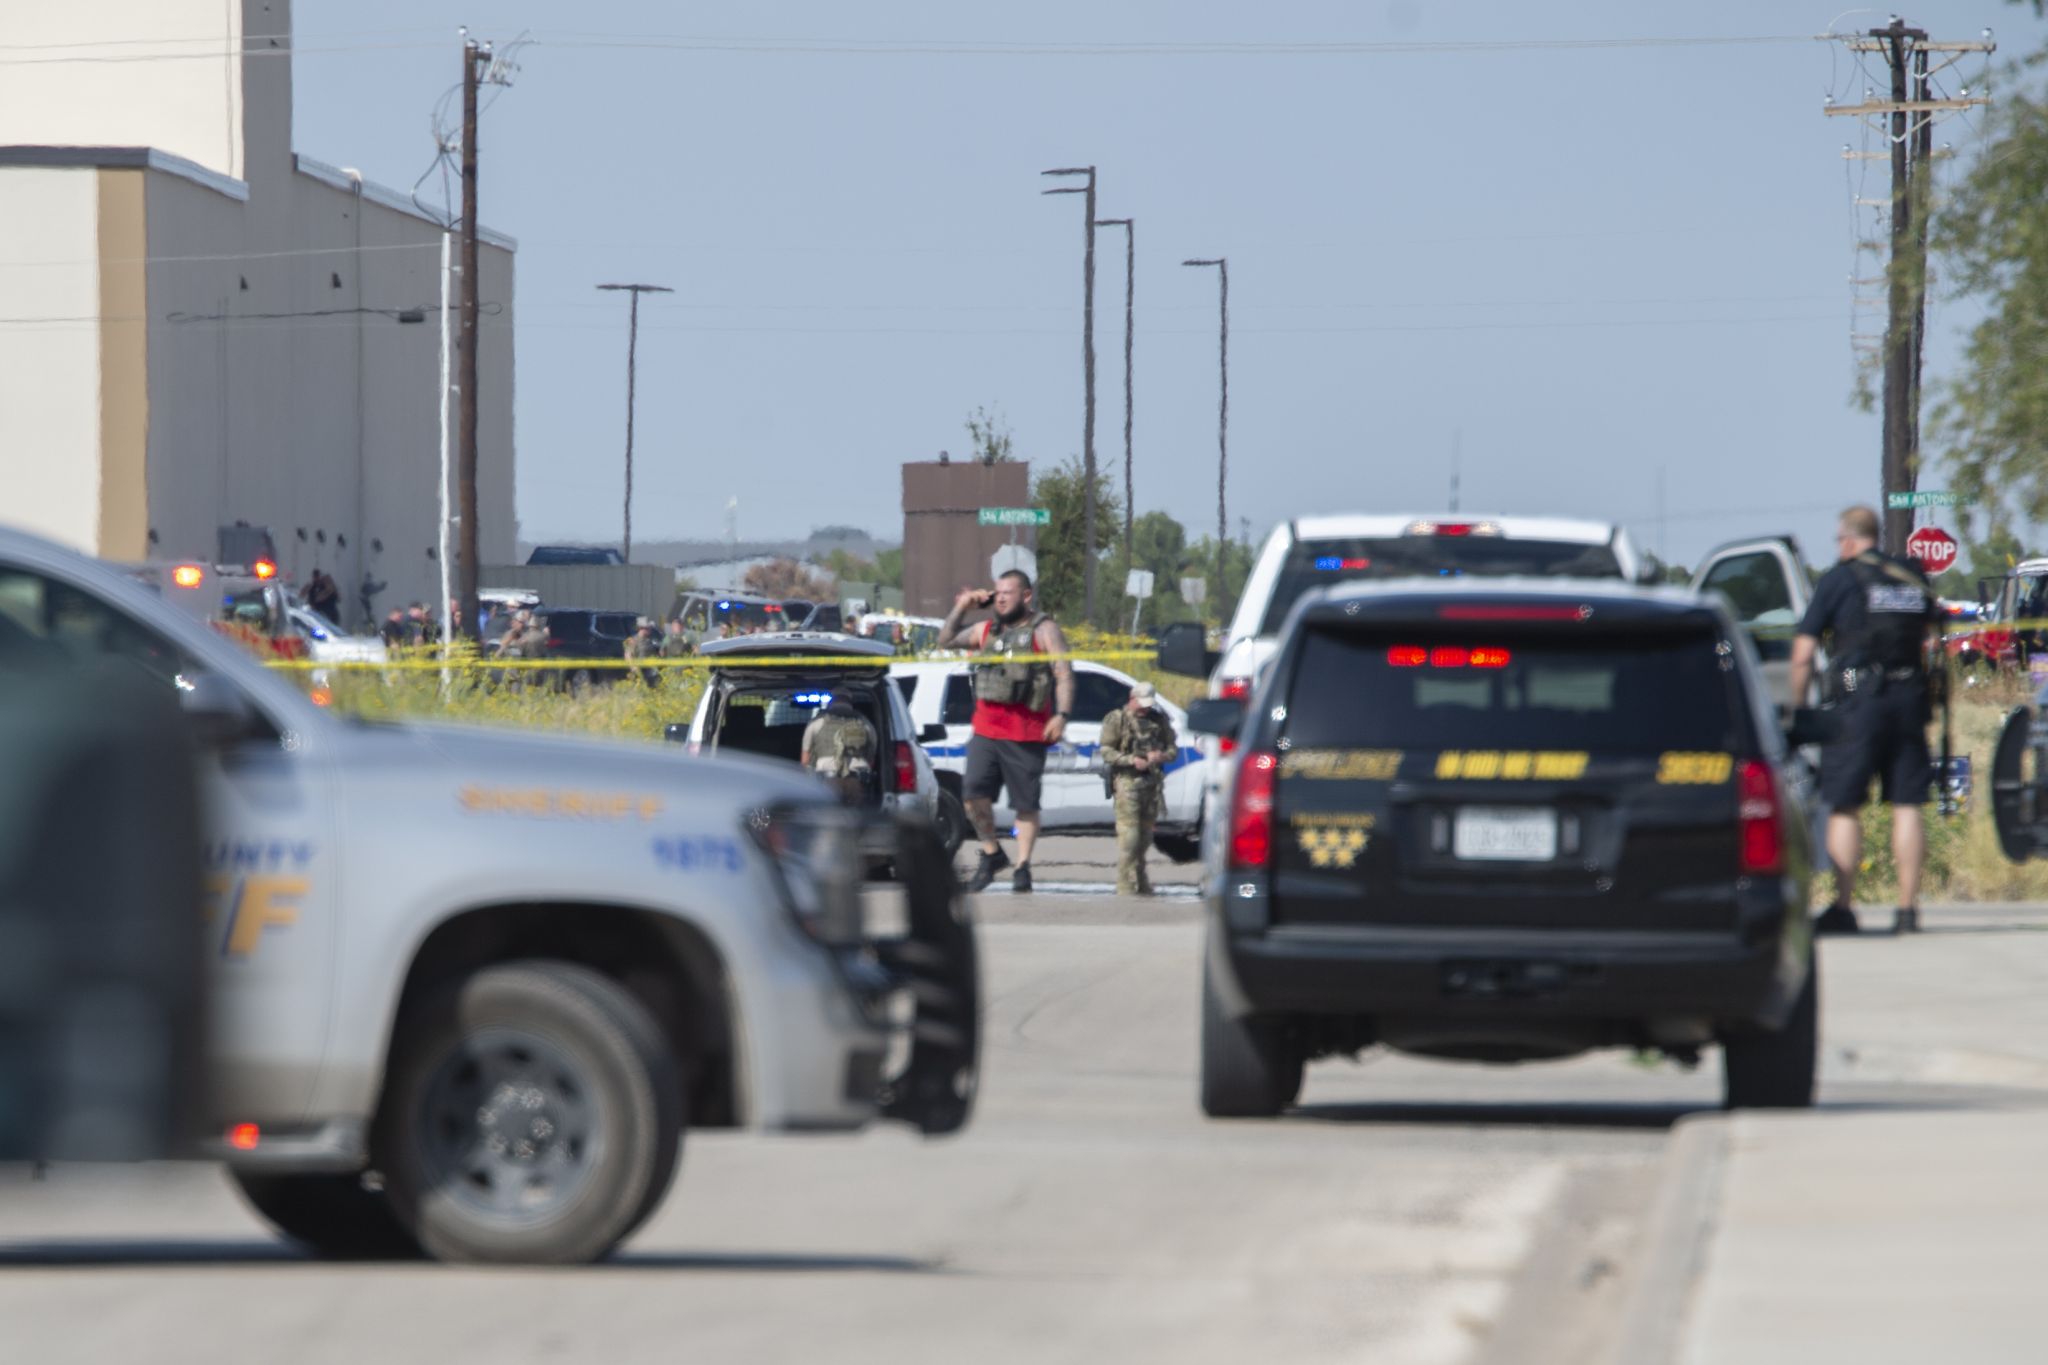 Odessa police chief: 1 suspect, 5 victims dead after shooting - Houston Chronicle